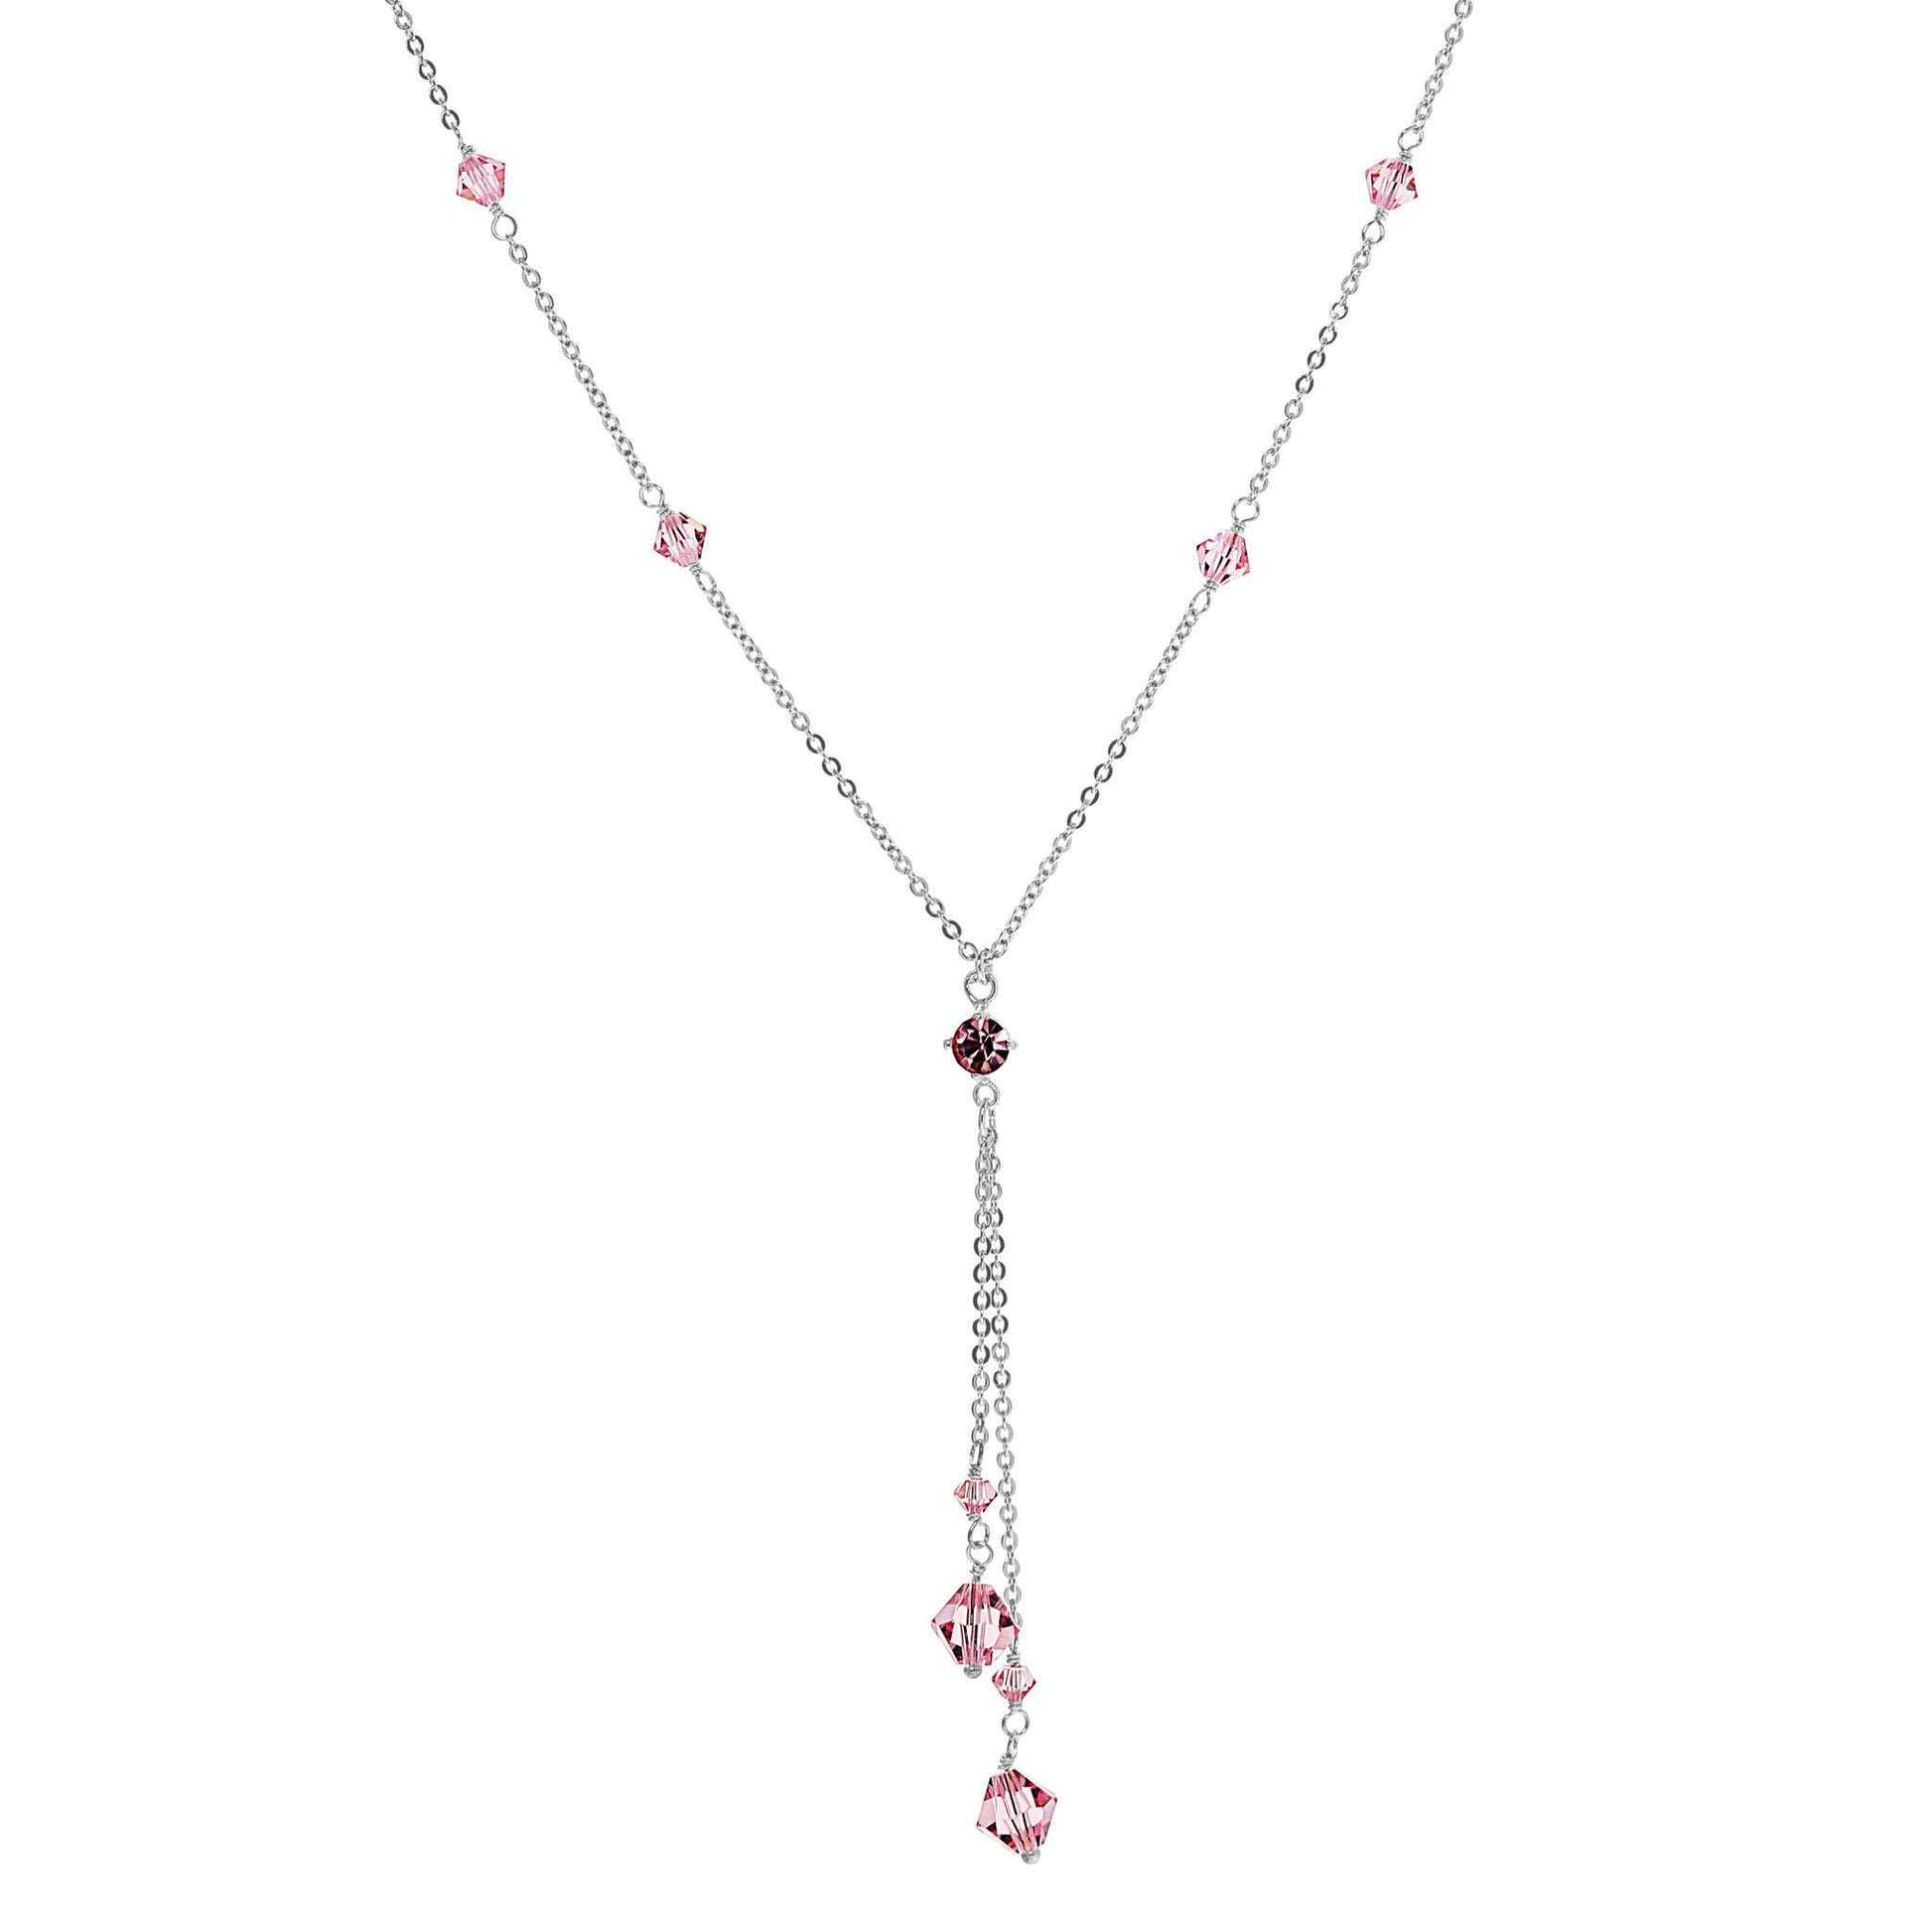 A pink crystal y-necklace displayed on a neutral white background.